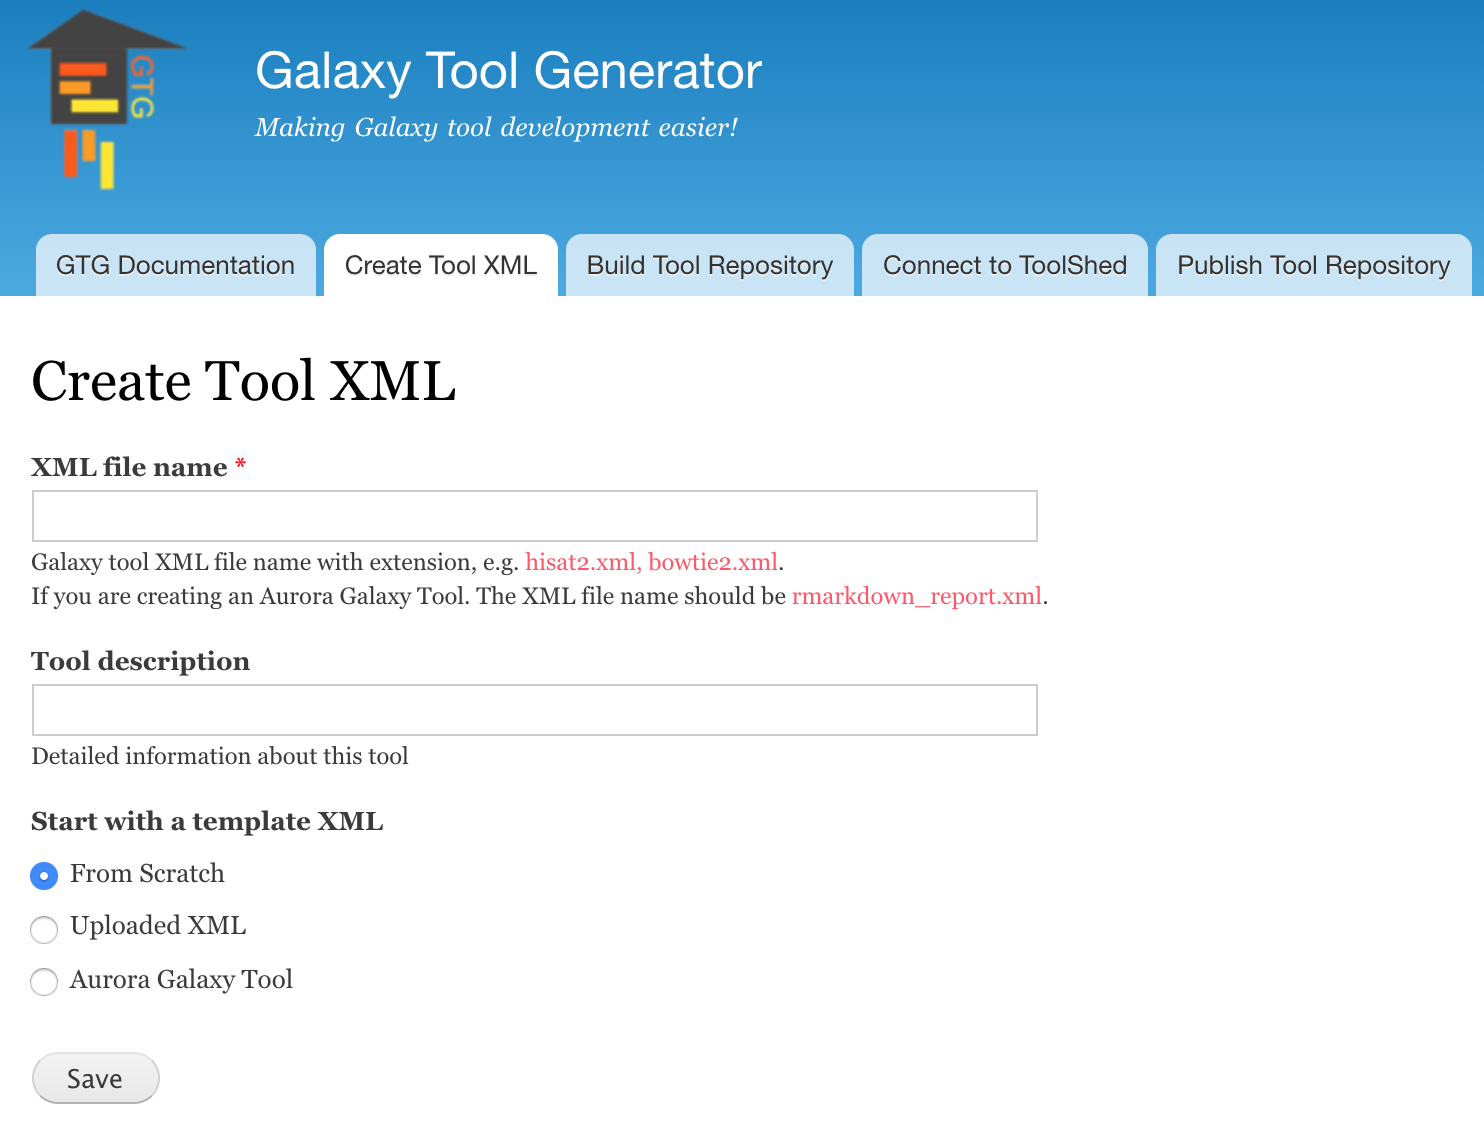 _images/create-tool-xml.png